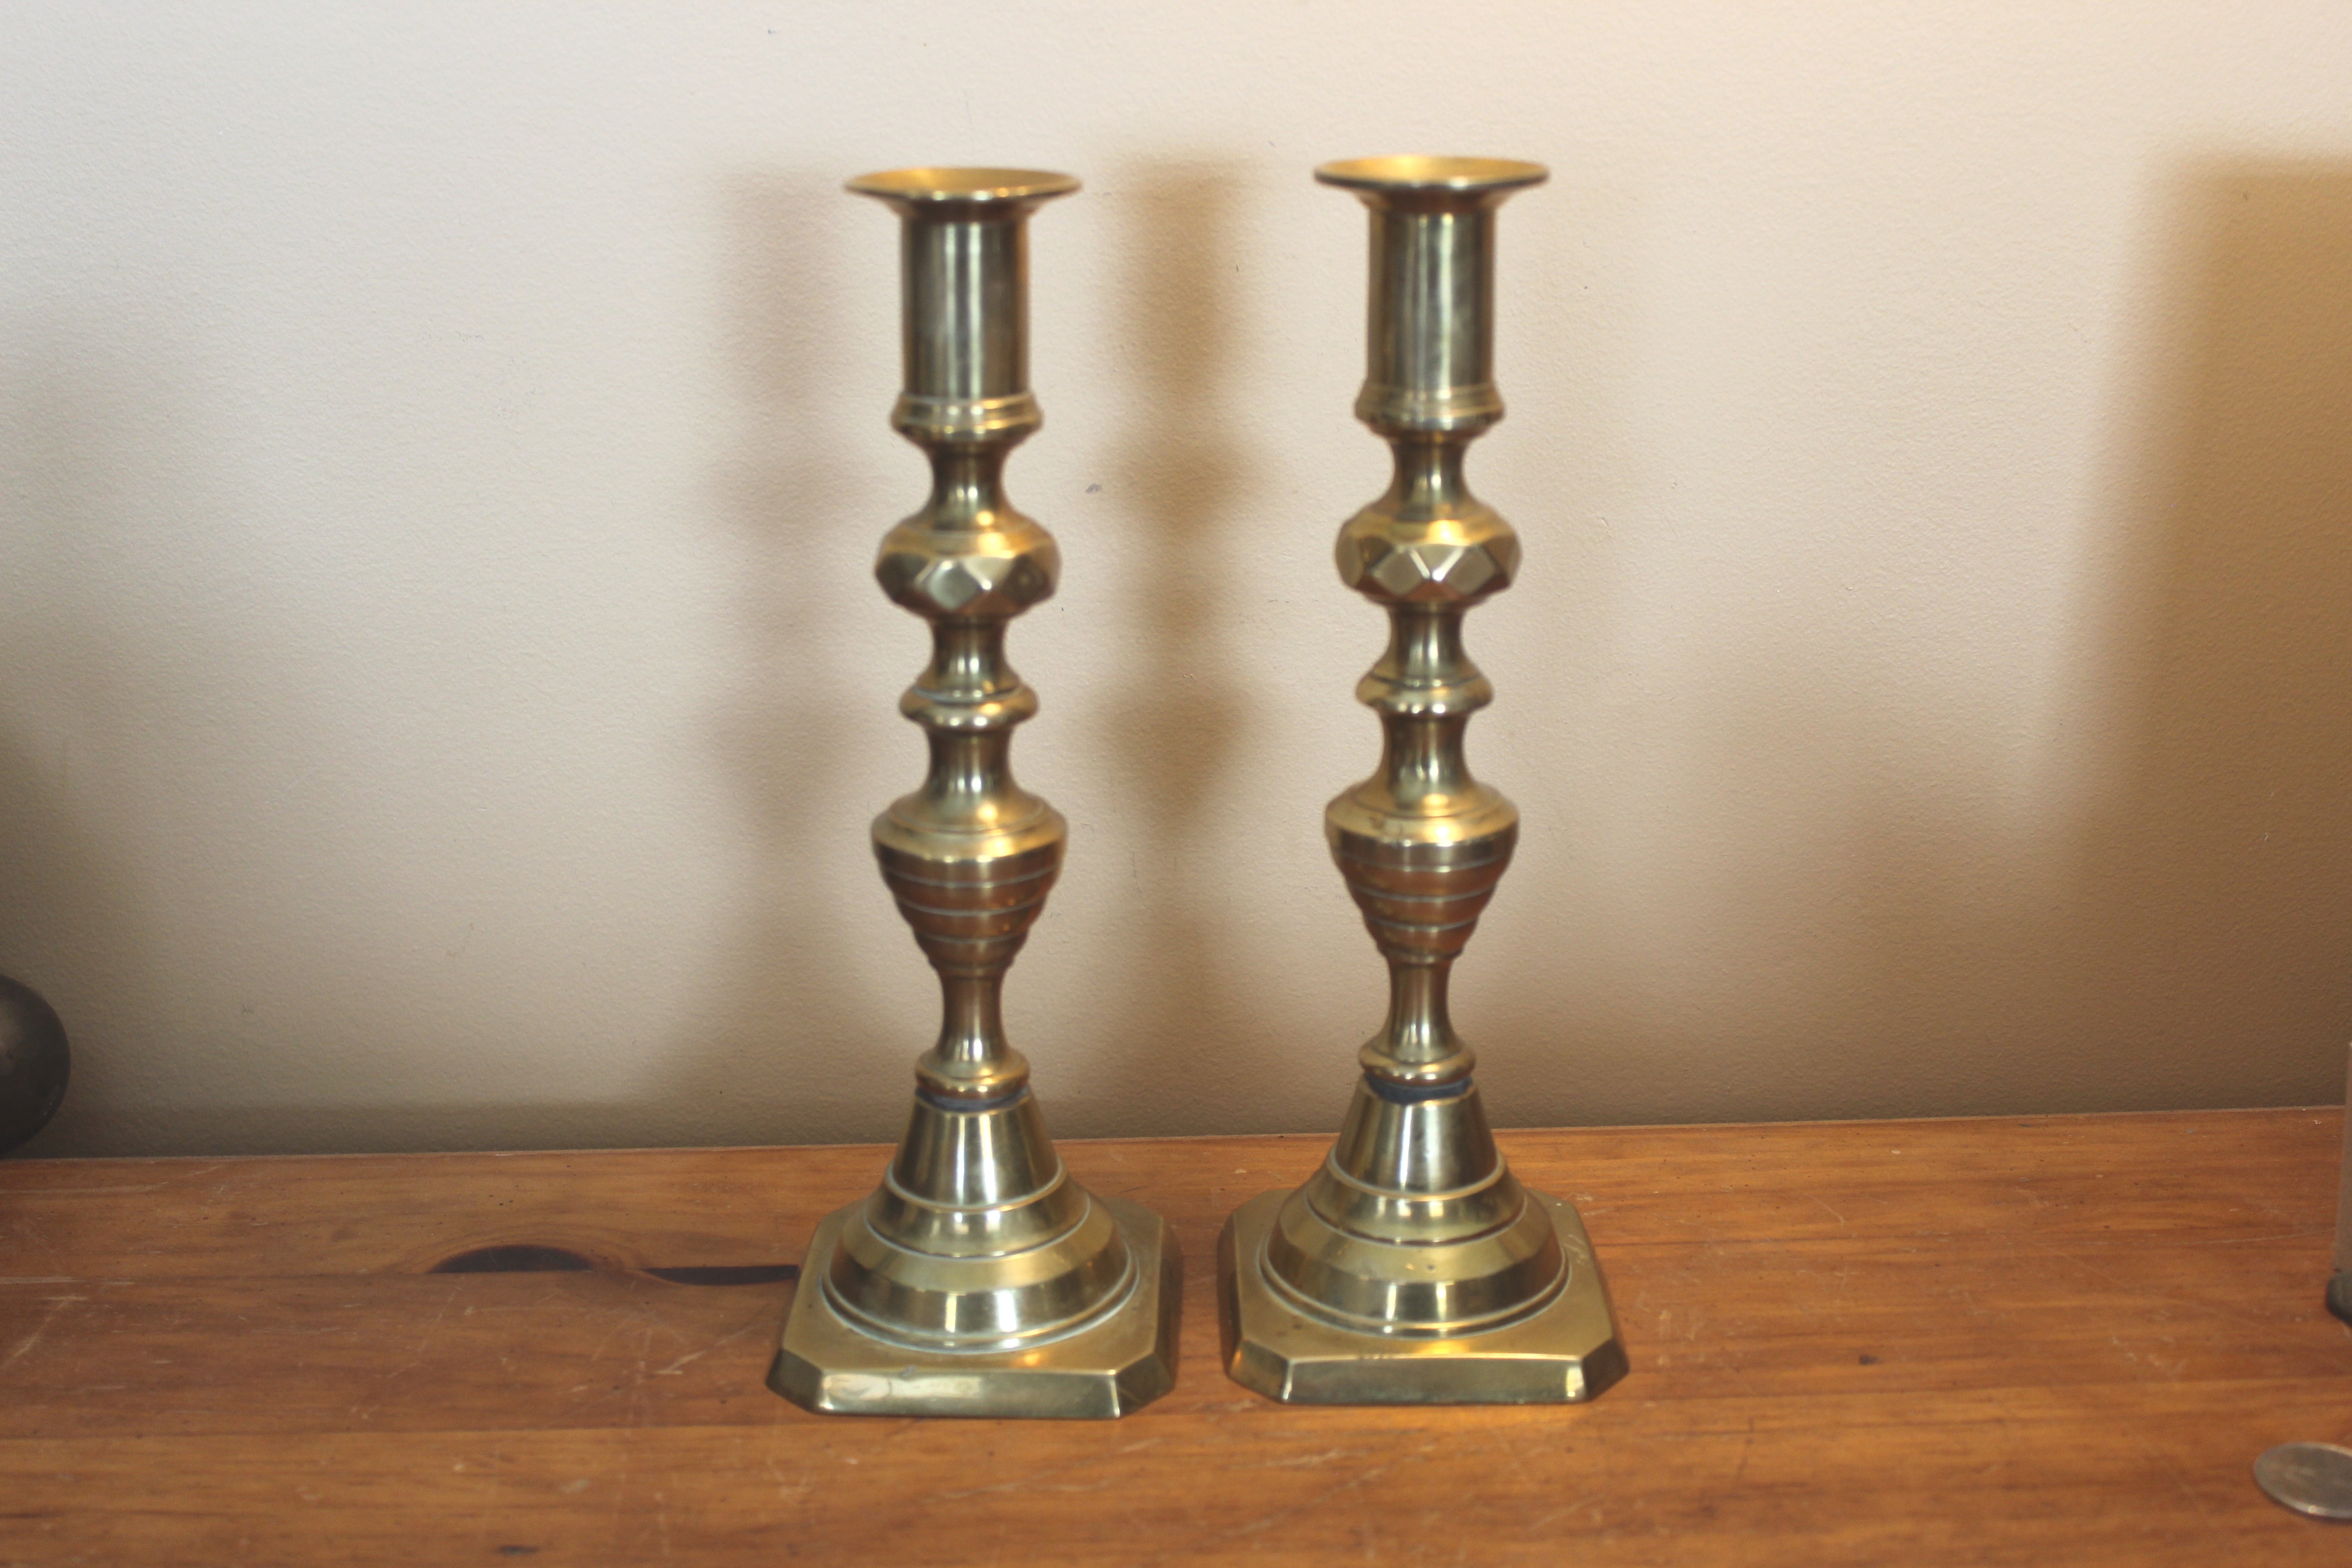 Vintage Brass Candlesticks Antique Candle Holder You Choose SOLD SEPARATELY  Mixed Graduated Gold Metal Mismatched Wedding Collection READ -  Canada